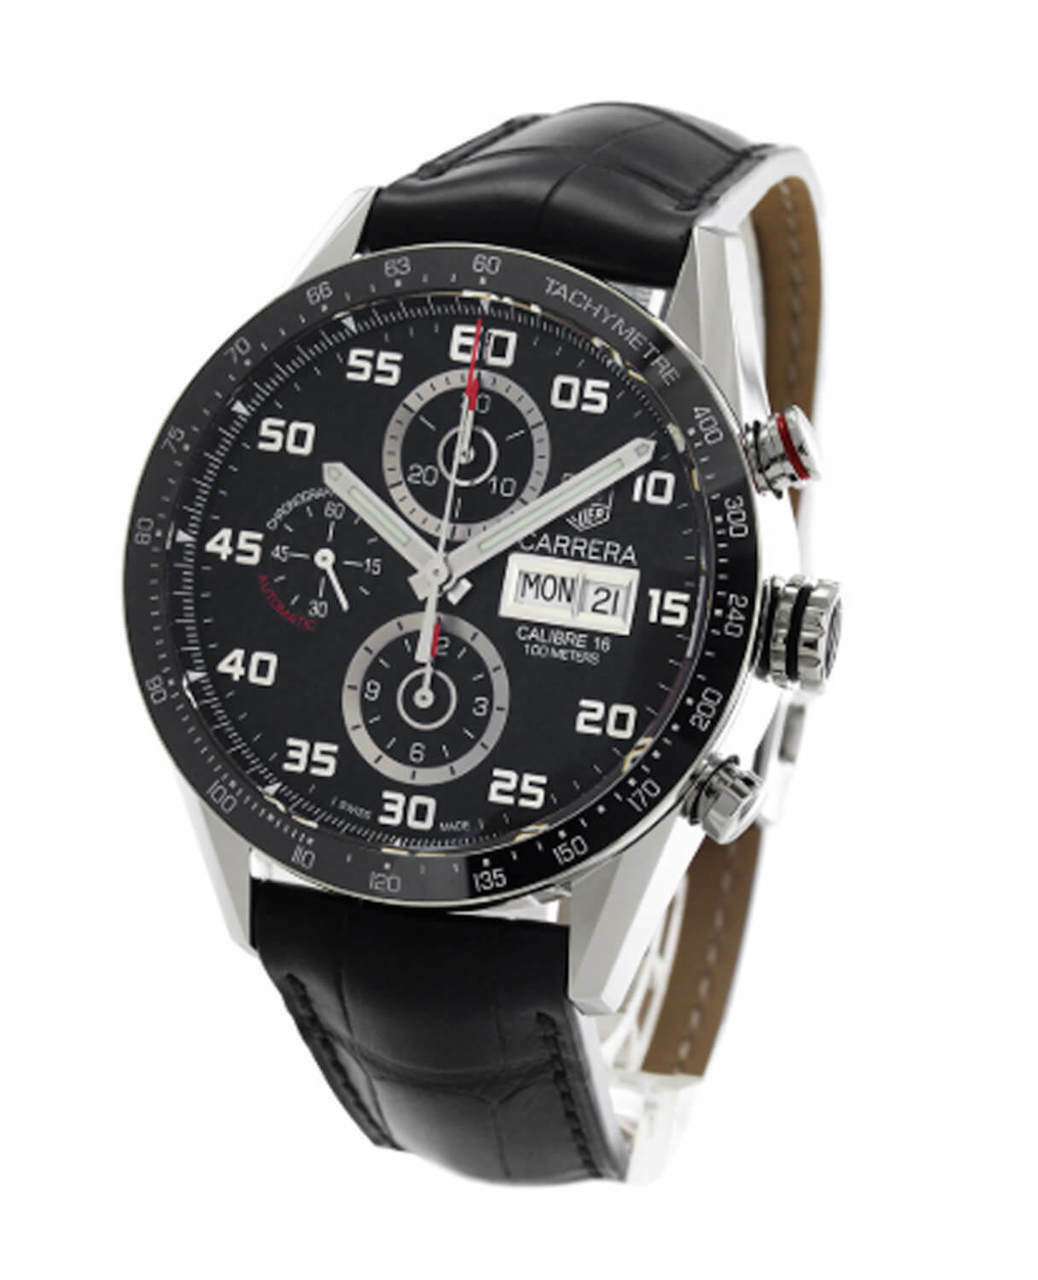  TAG Heuer Carrera Automatic Chronograph - Diameter 44 mm  CBN2A1A.BA0643 : Tag Heuer: Clothing, Shoes & Jewelry